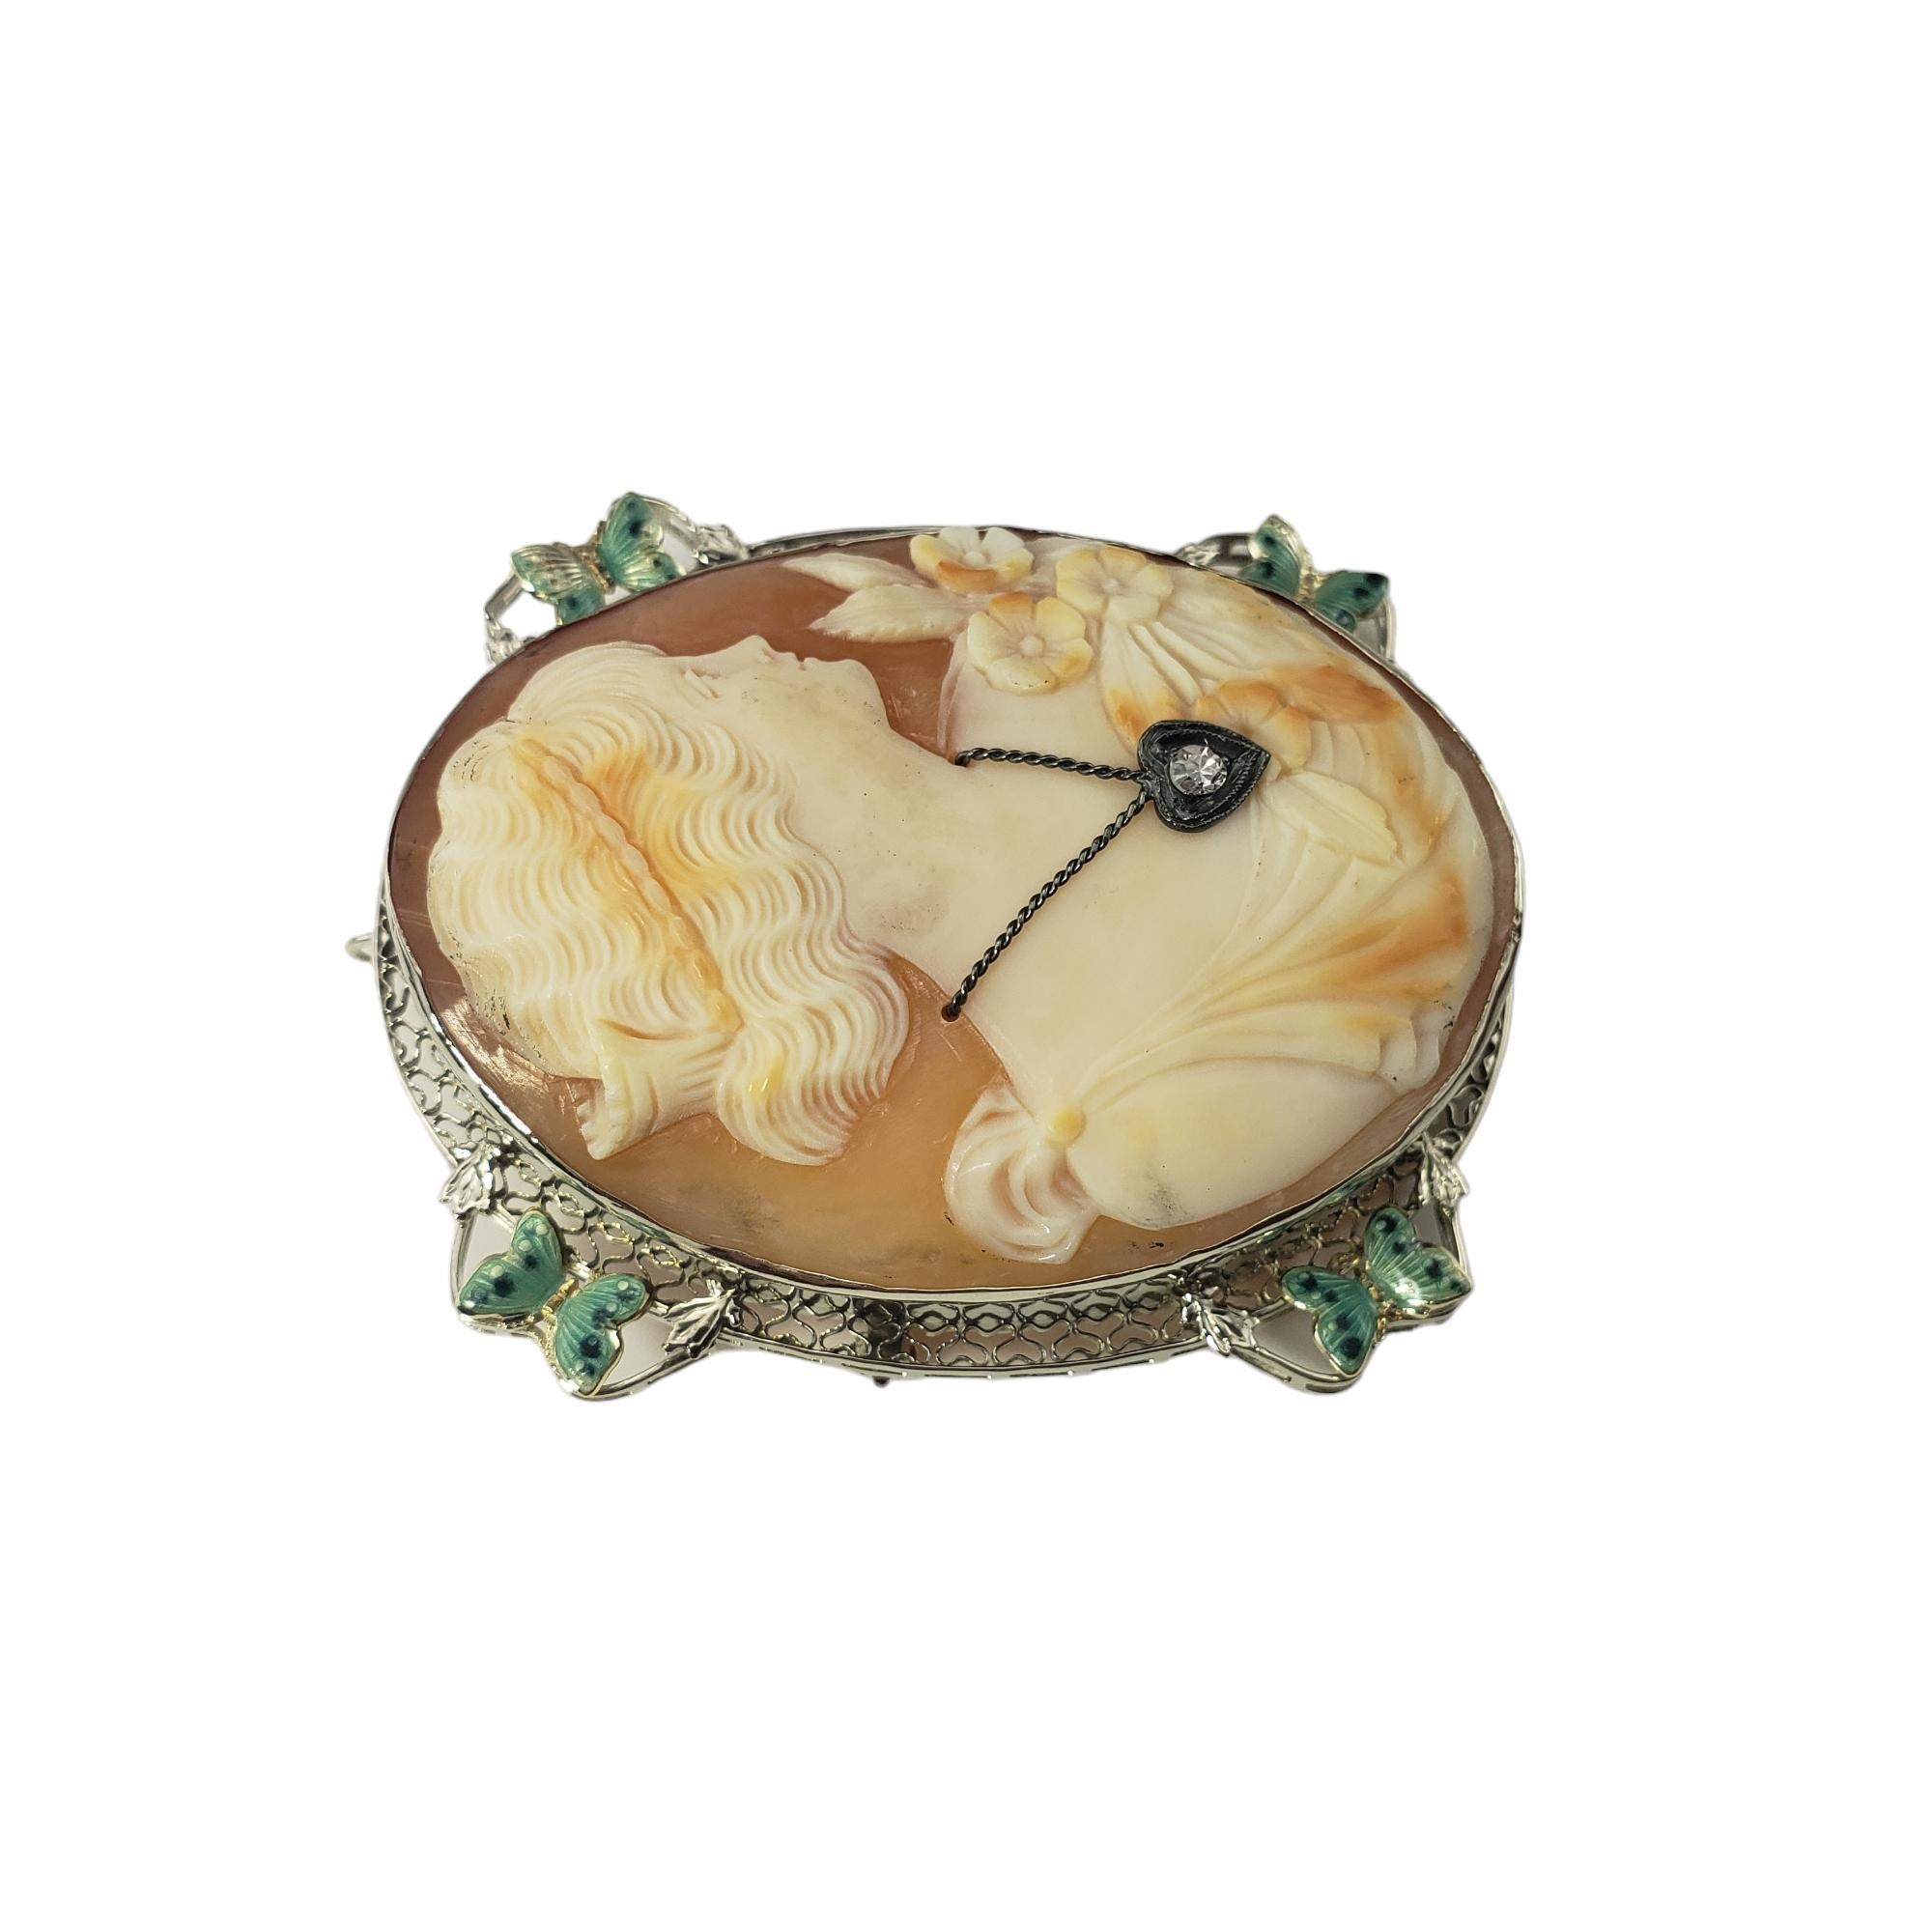 14 Karat White Gold and Diamond Cameo Brooch/Pendant-

This elegant cameo brooch features a lovely lady in profile set in beautifully detailed 14K white gold filigree.  Accented with one round single cut diamond.*
*Chip noted to stone not visible to